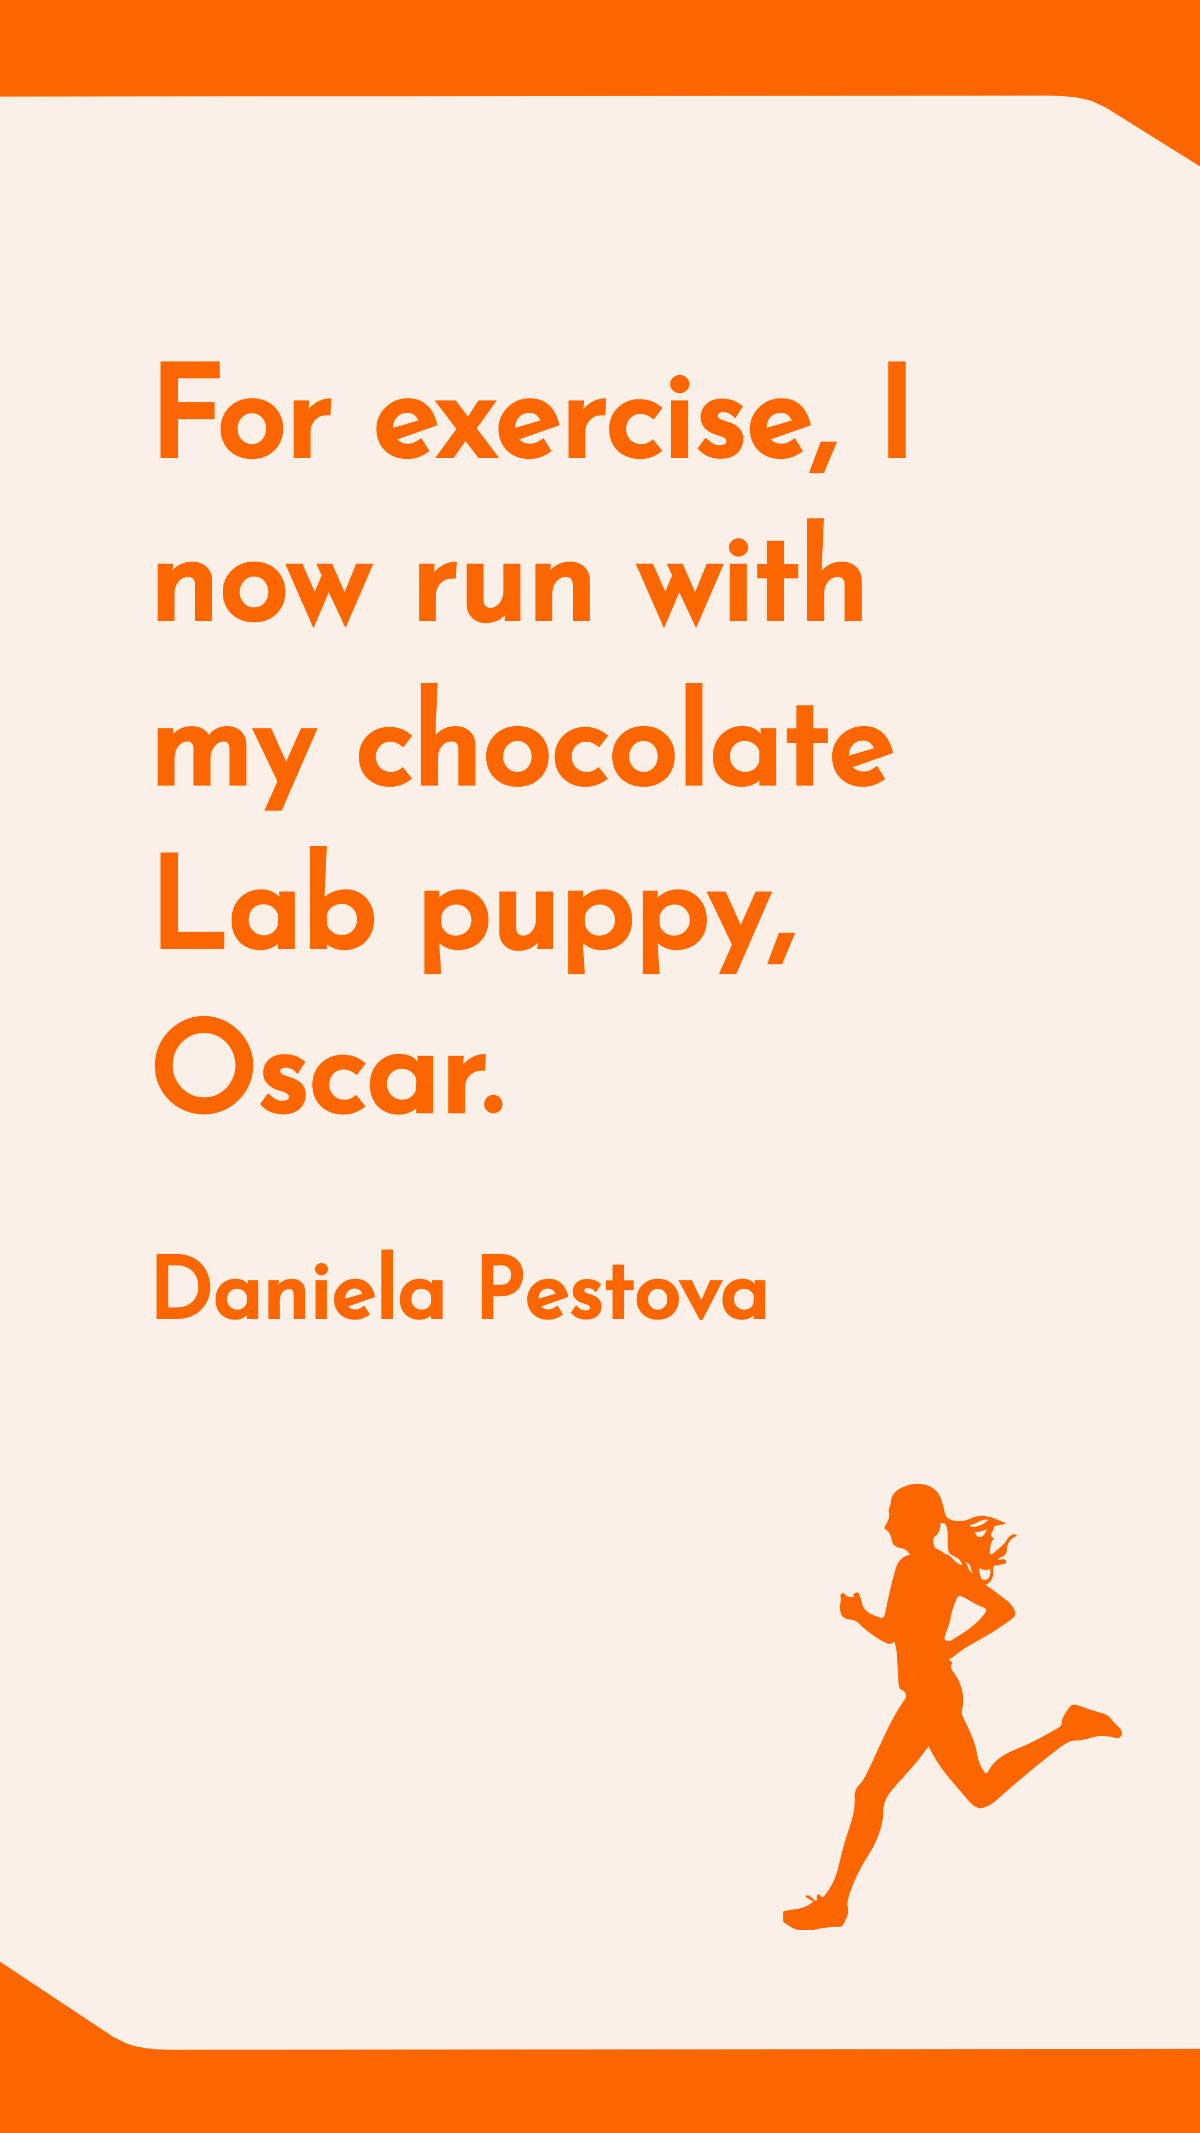 Daniela Pestova - For exercise, I now run with my chocolate Lab puppy, Oscar. Template